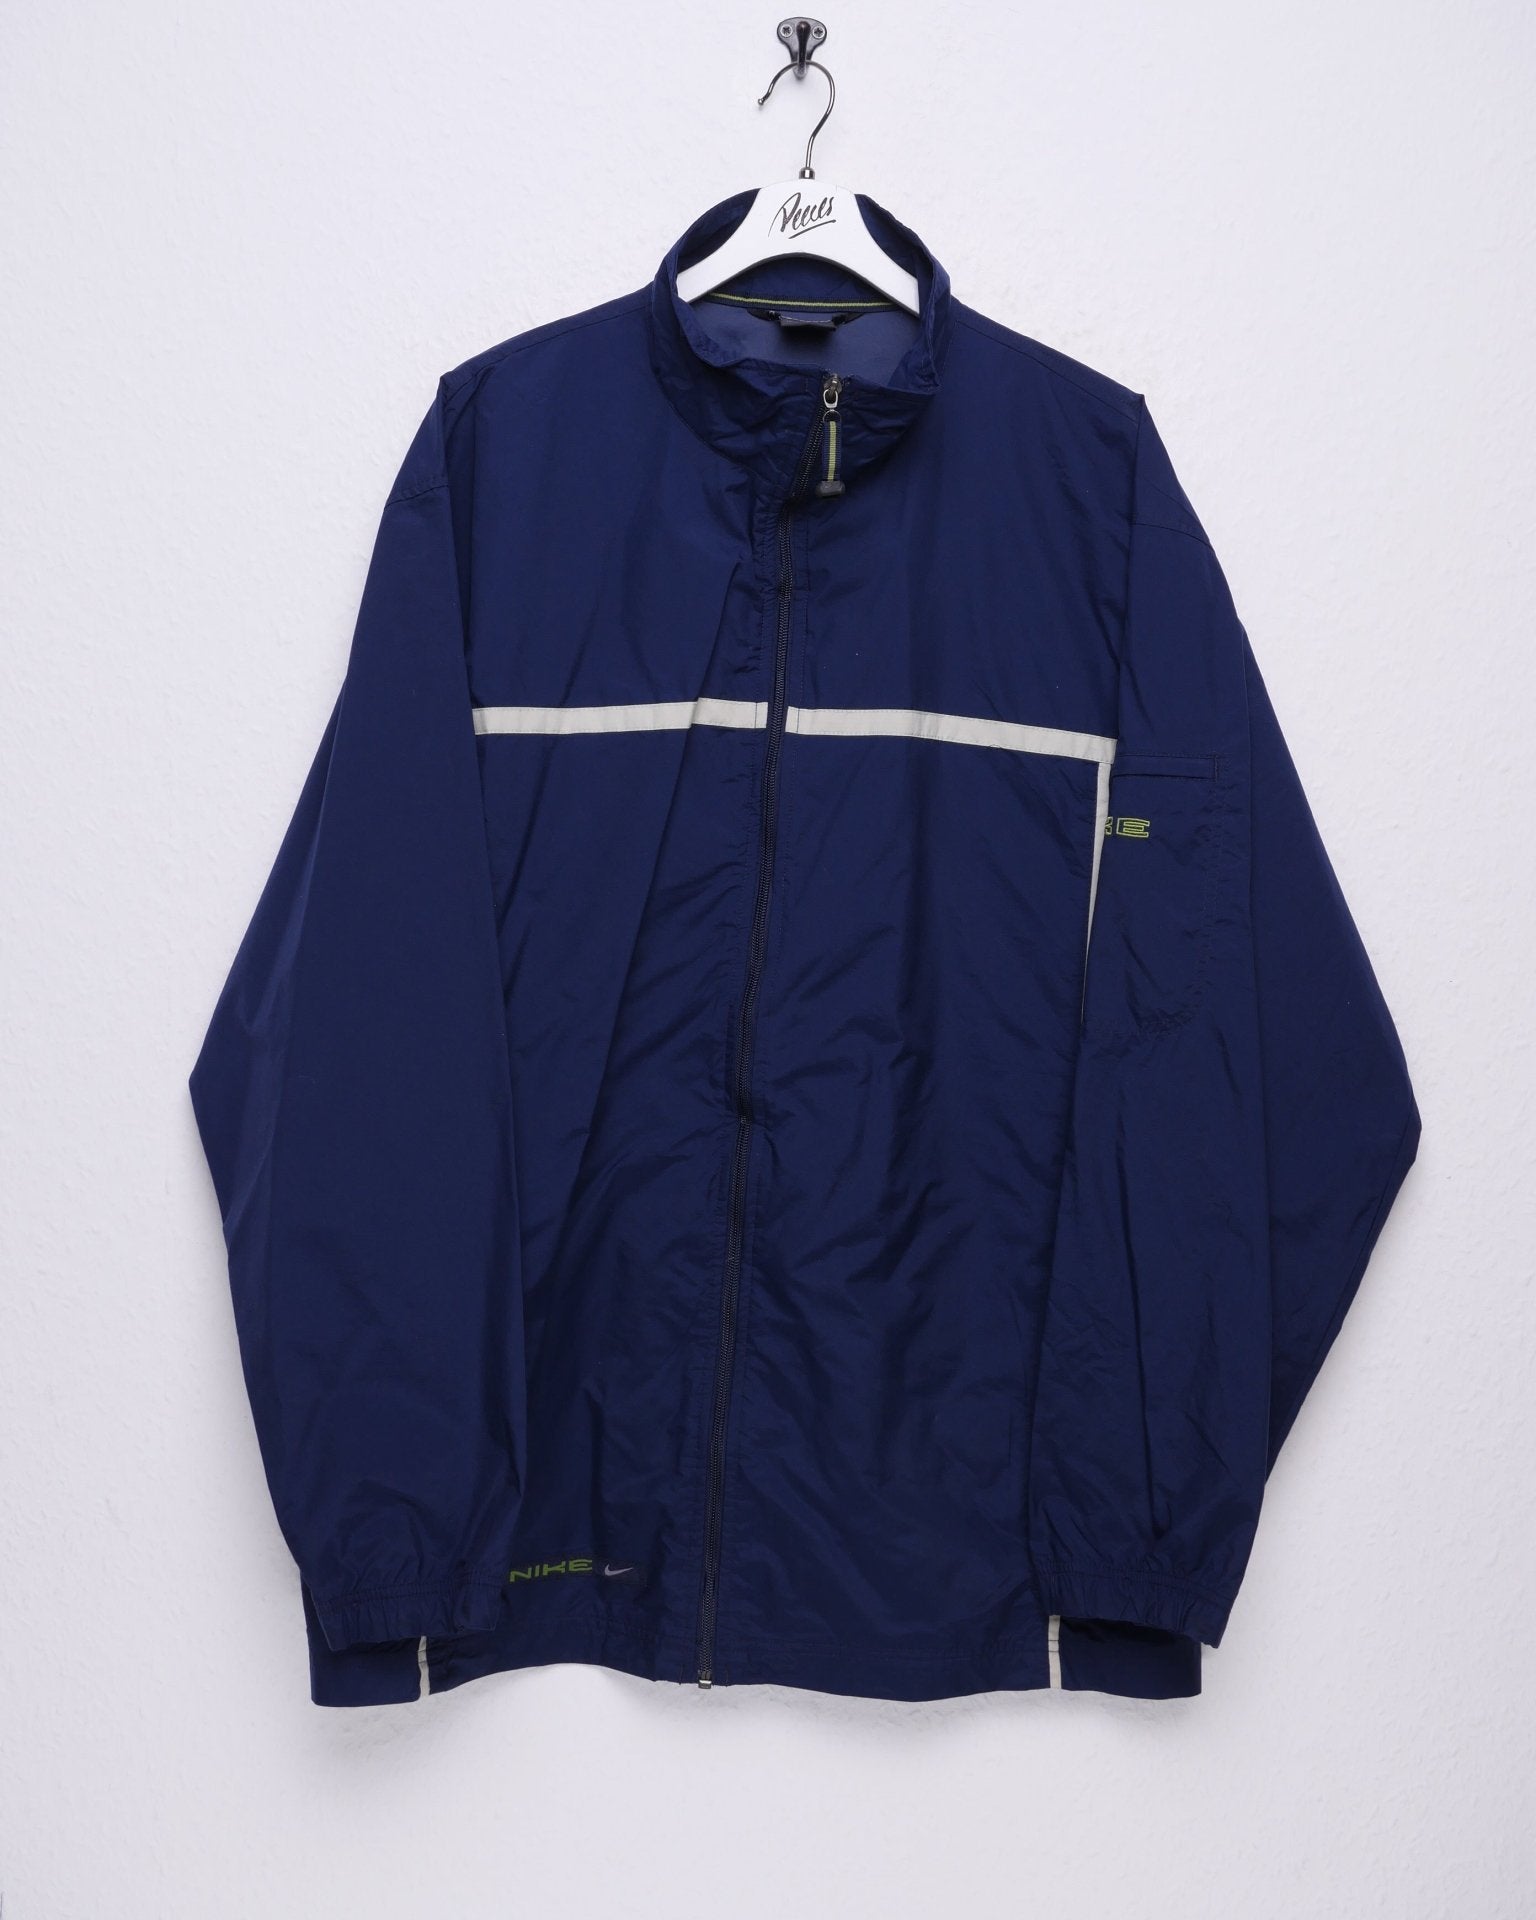 Nike embroidered Spellout striped navy oversized Track Jacke - Peeces